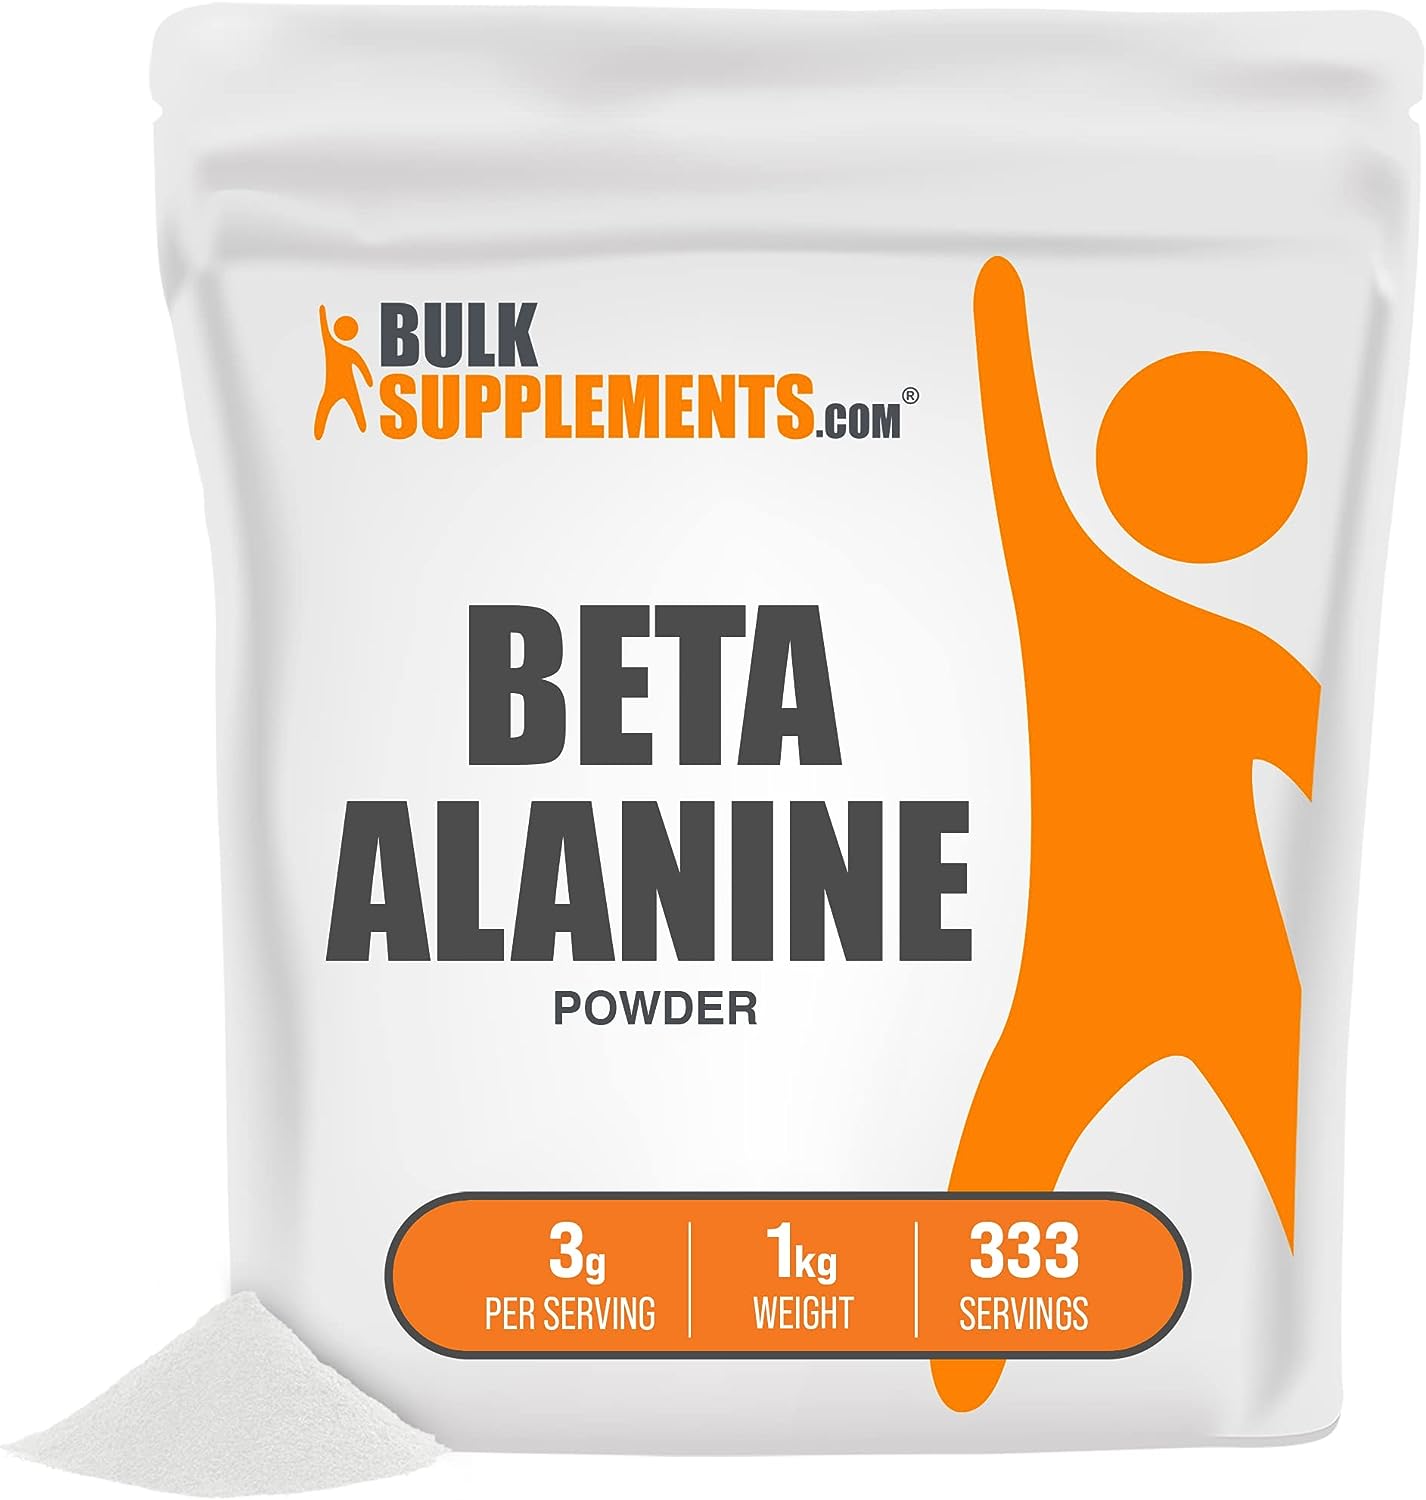 Beta Alanine Powder - Unflavored Pre Workout - Beta Alanine Supplement - Vegan Pre Workout - Pre-Workout for Women & Men - Muscle Recovery Supplements (1 Kilogram - 2.2 lbs)